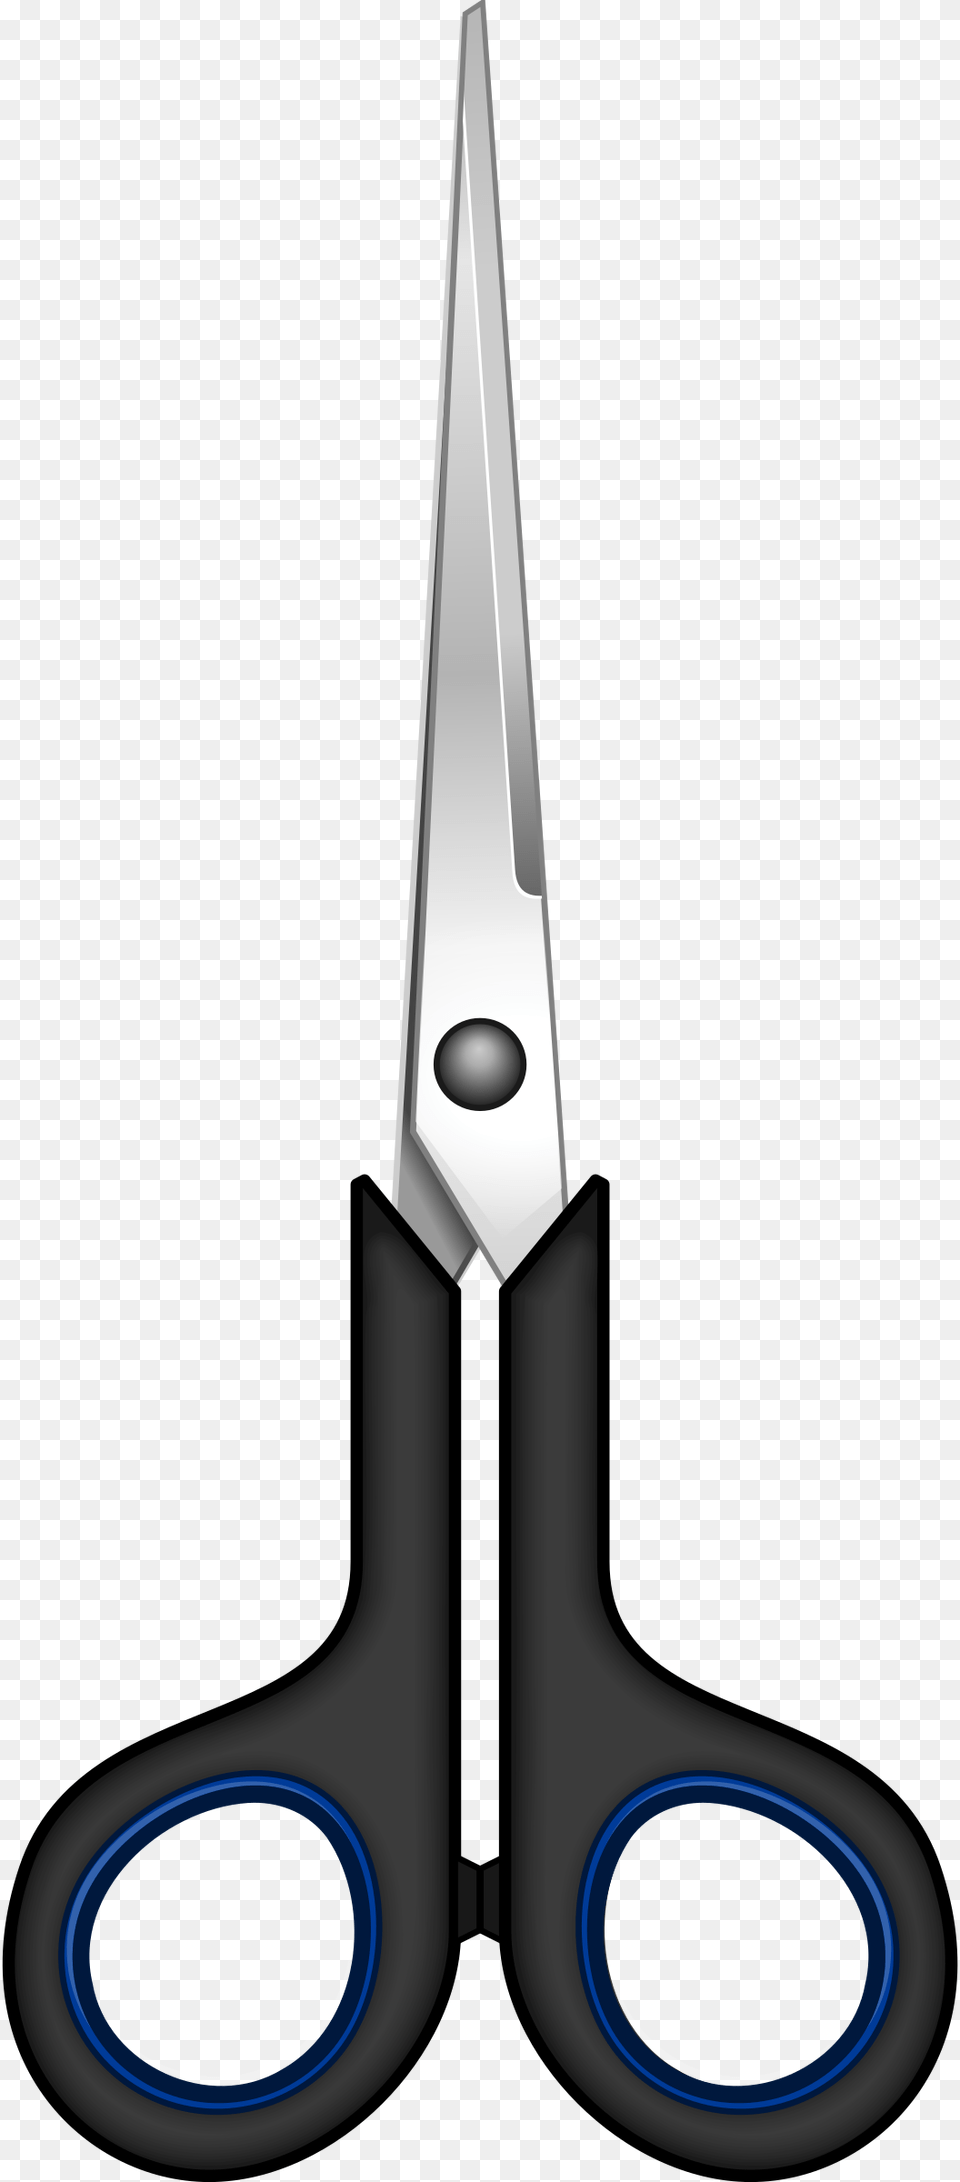 This Free Icons Design Of Paper Scissors, Blade, Shears, Weapon Png